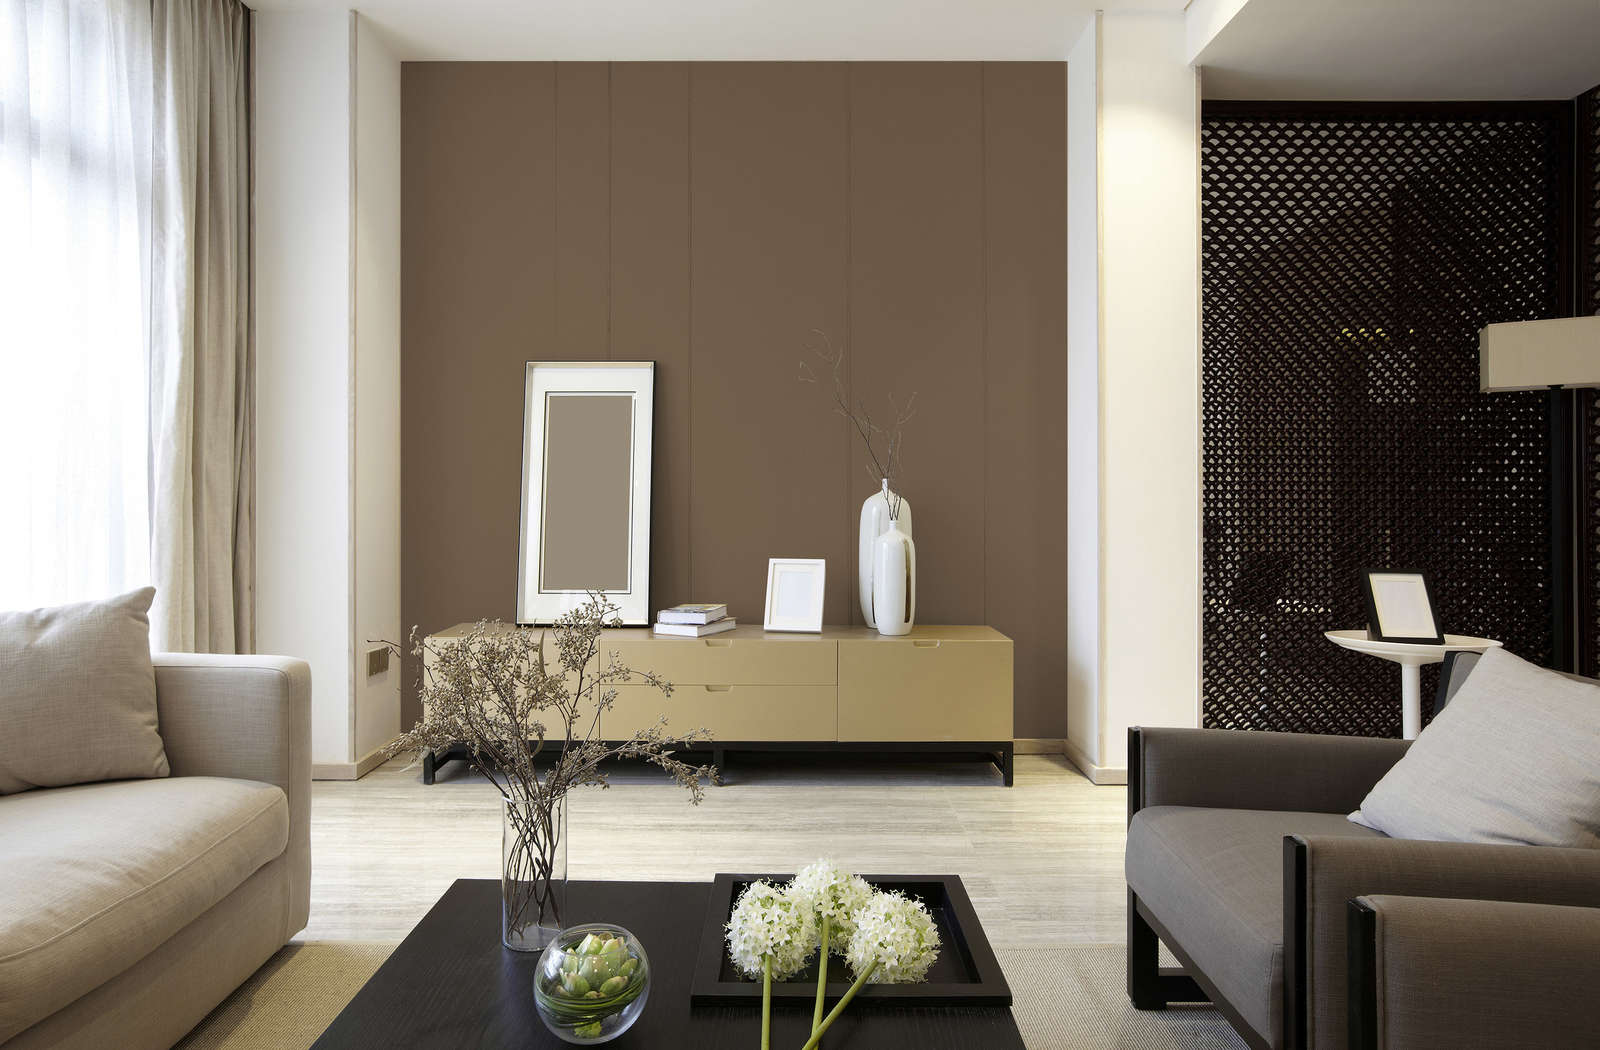             Premium Wall Paint Soothing Brown »Essential Earth« NW711 – 2.5 litre
        